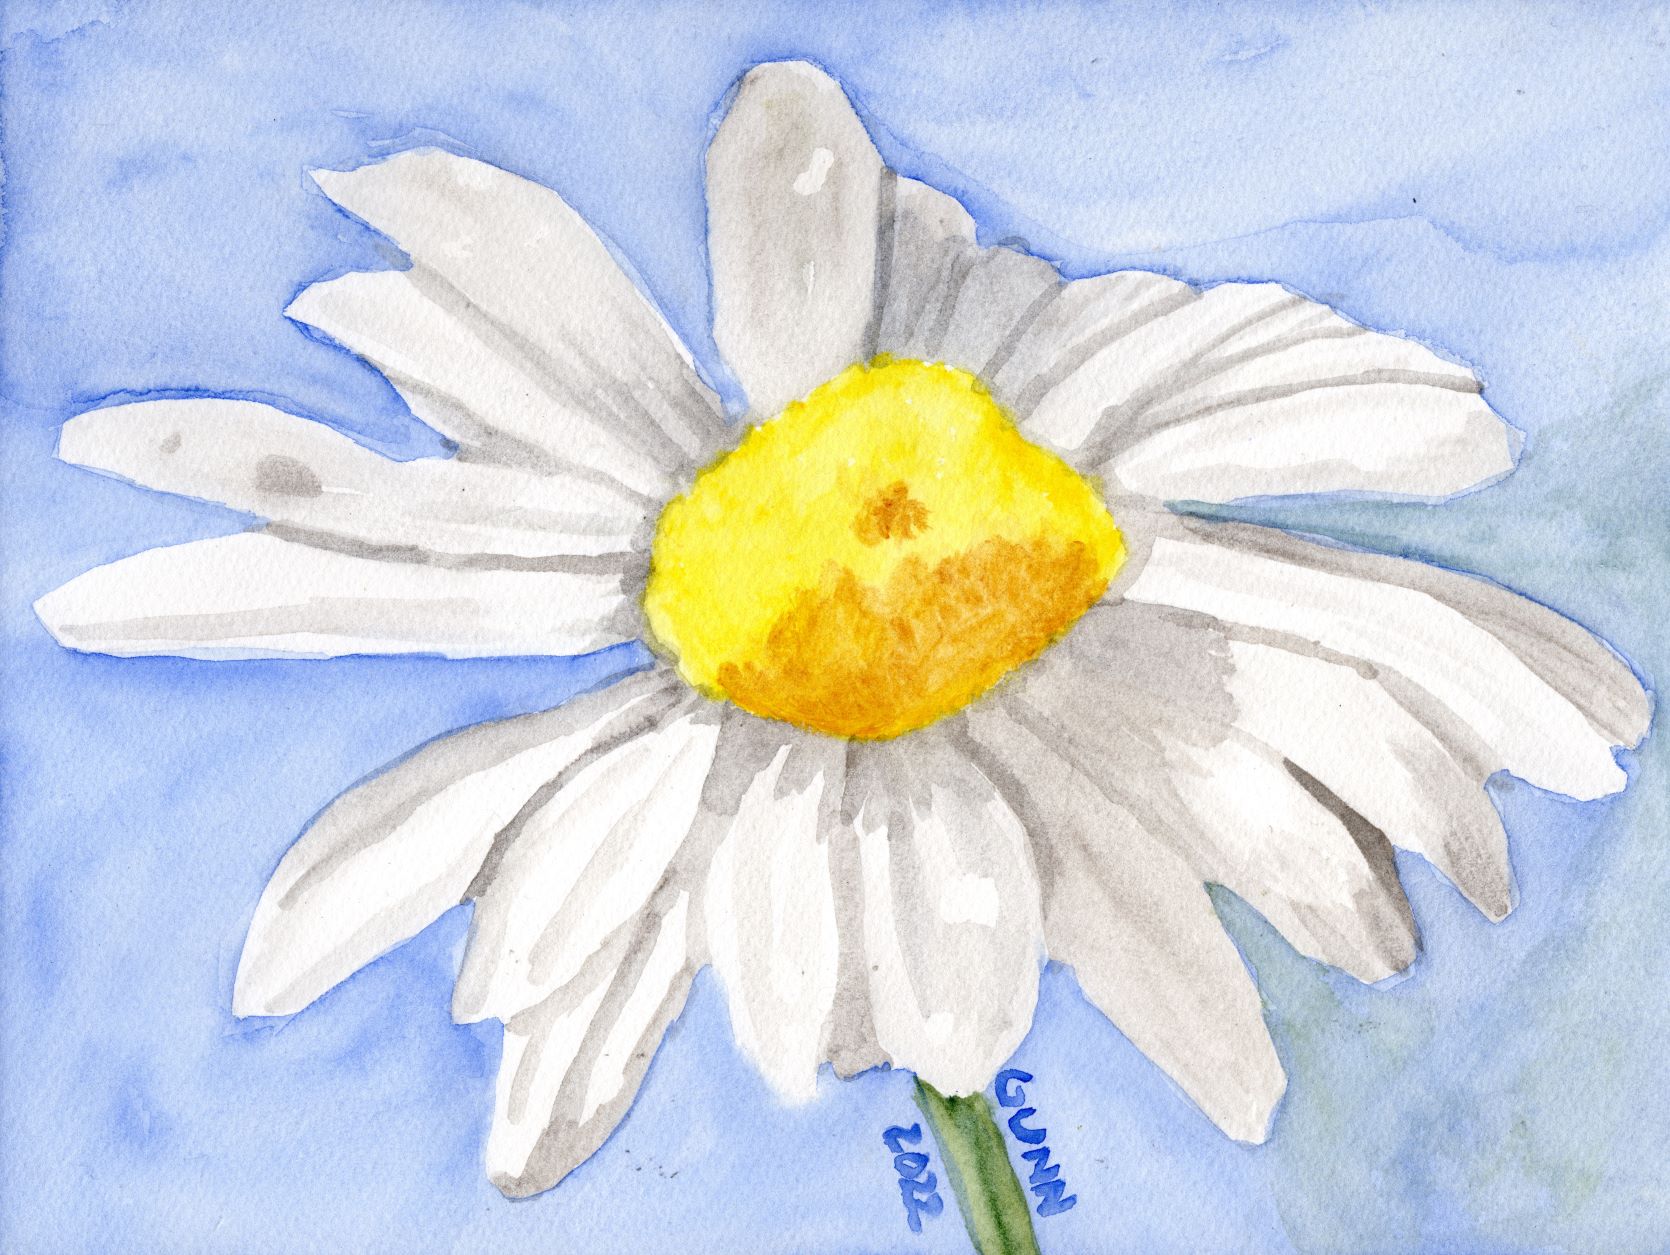 watercolor painting of single daisy flower using only four colors